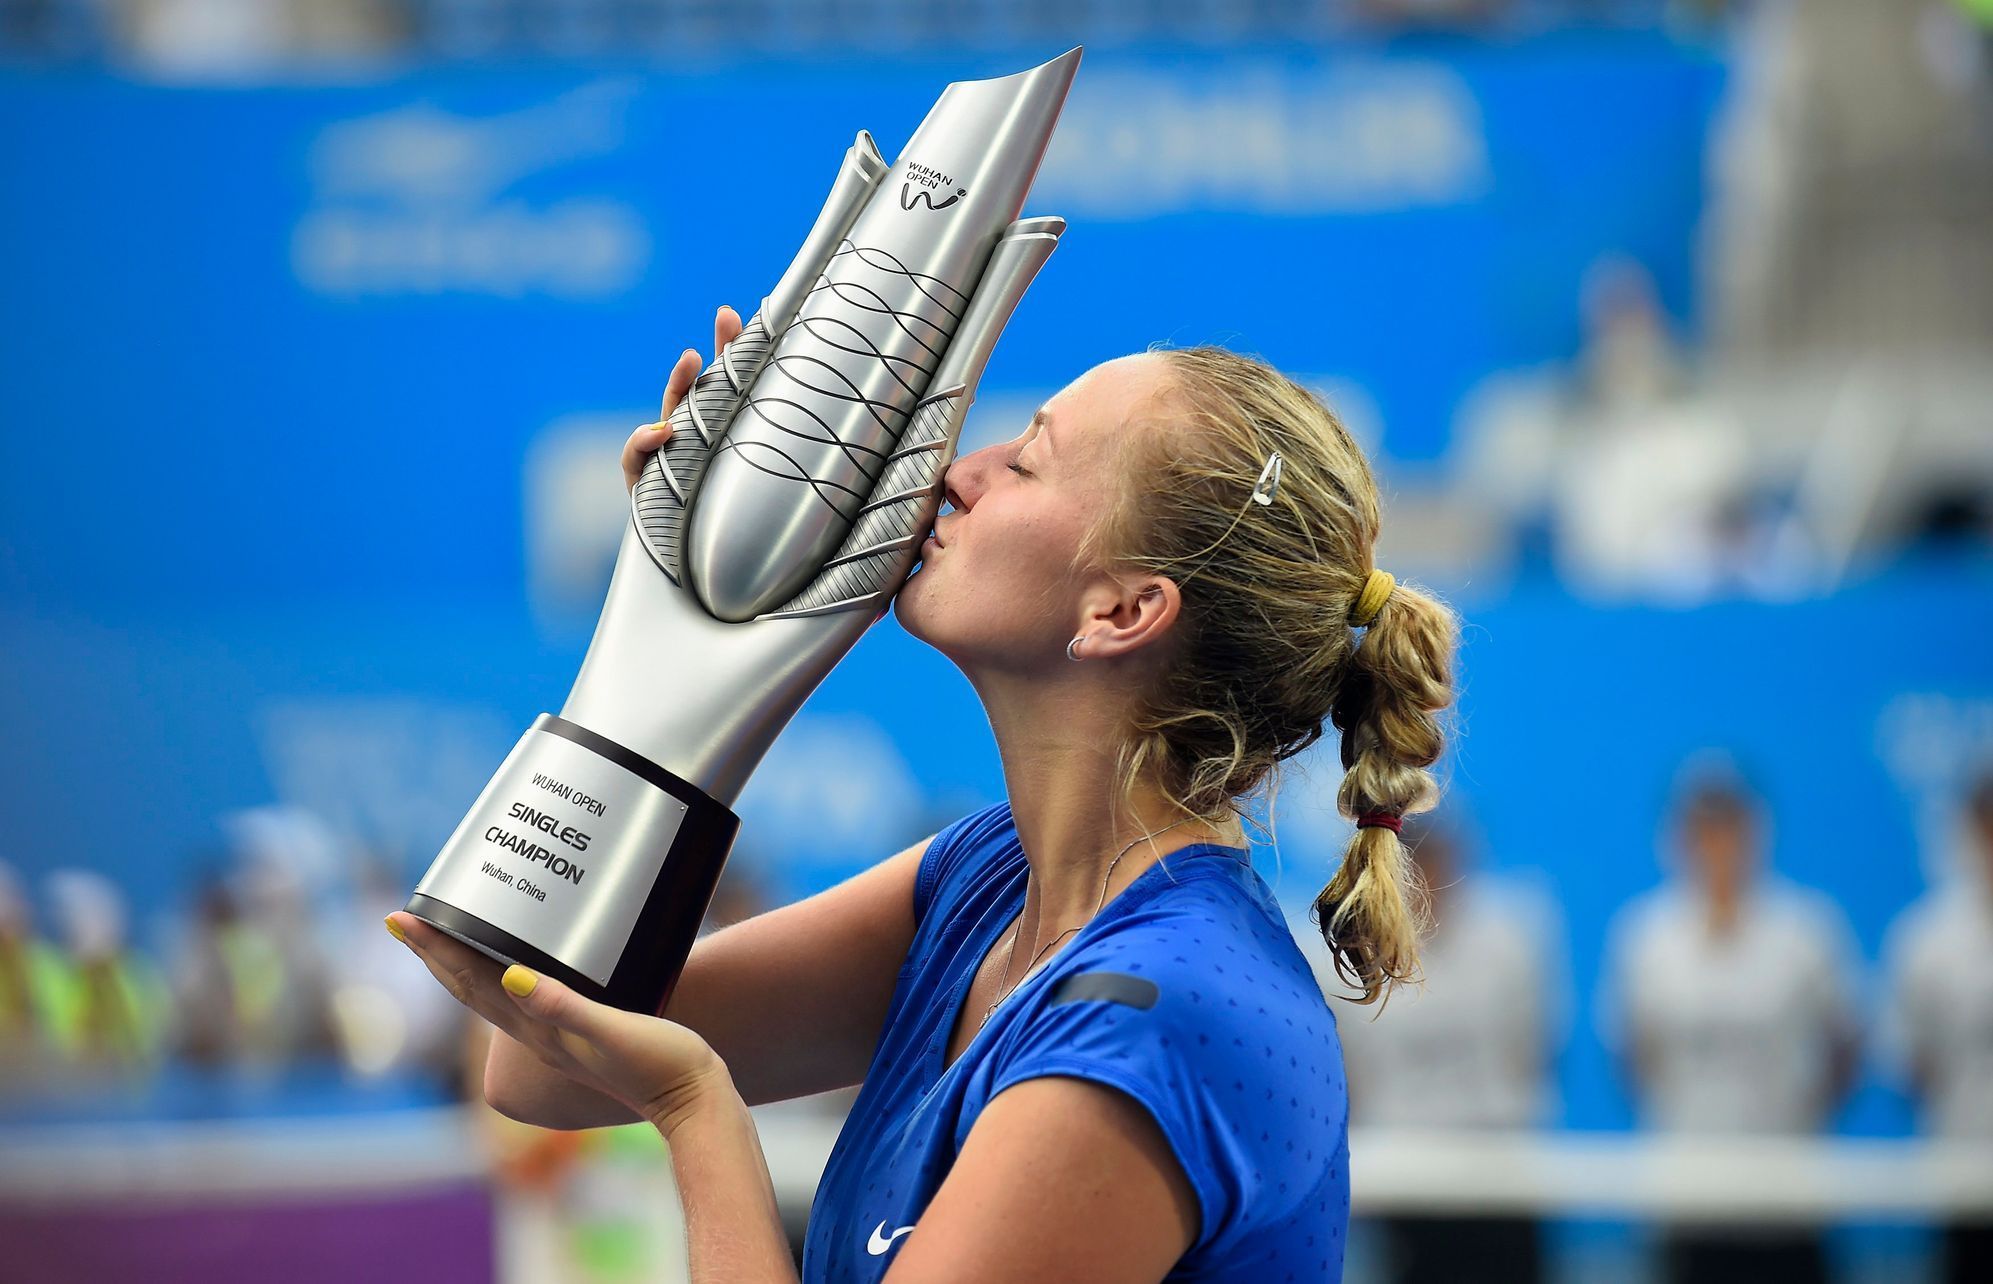 Kvitova of the Czech Republic kisses the trophy after winning the women's singles final match against Bouchard of Canada at the Wuhan Open Tennis Tournament, in Wuhan